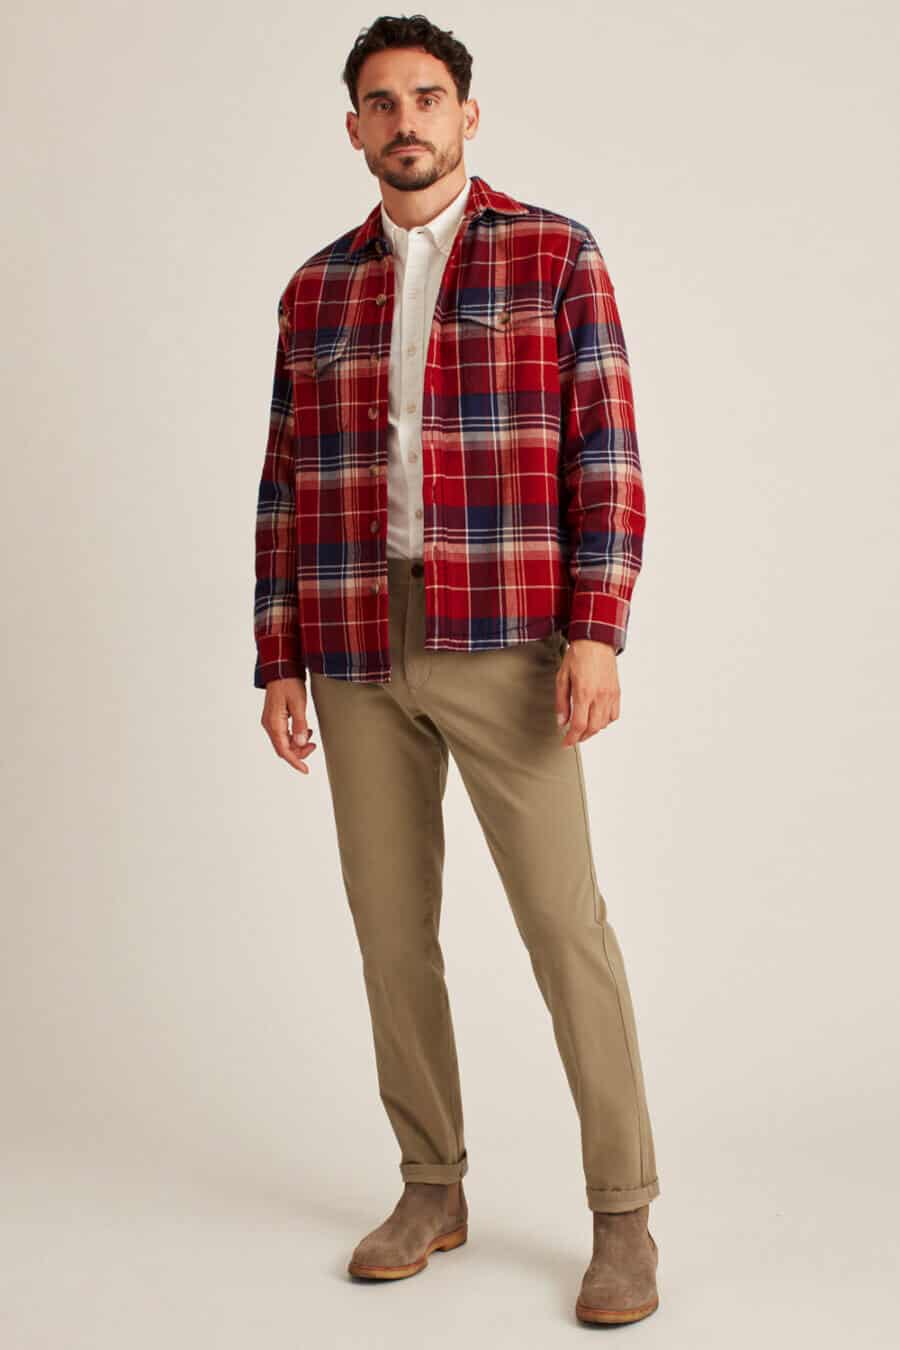 Men's khaki pants worn with a red plaid flannel shirt and suede Chelsea boots